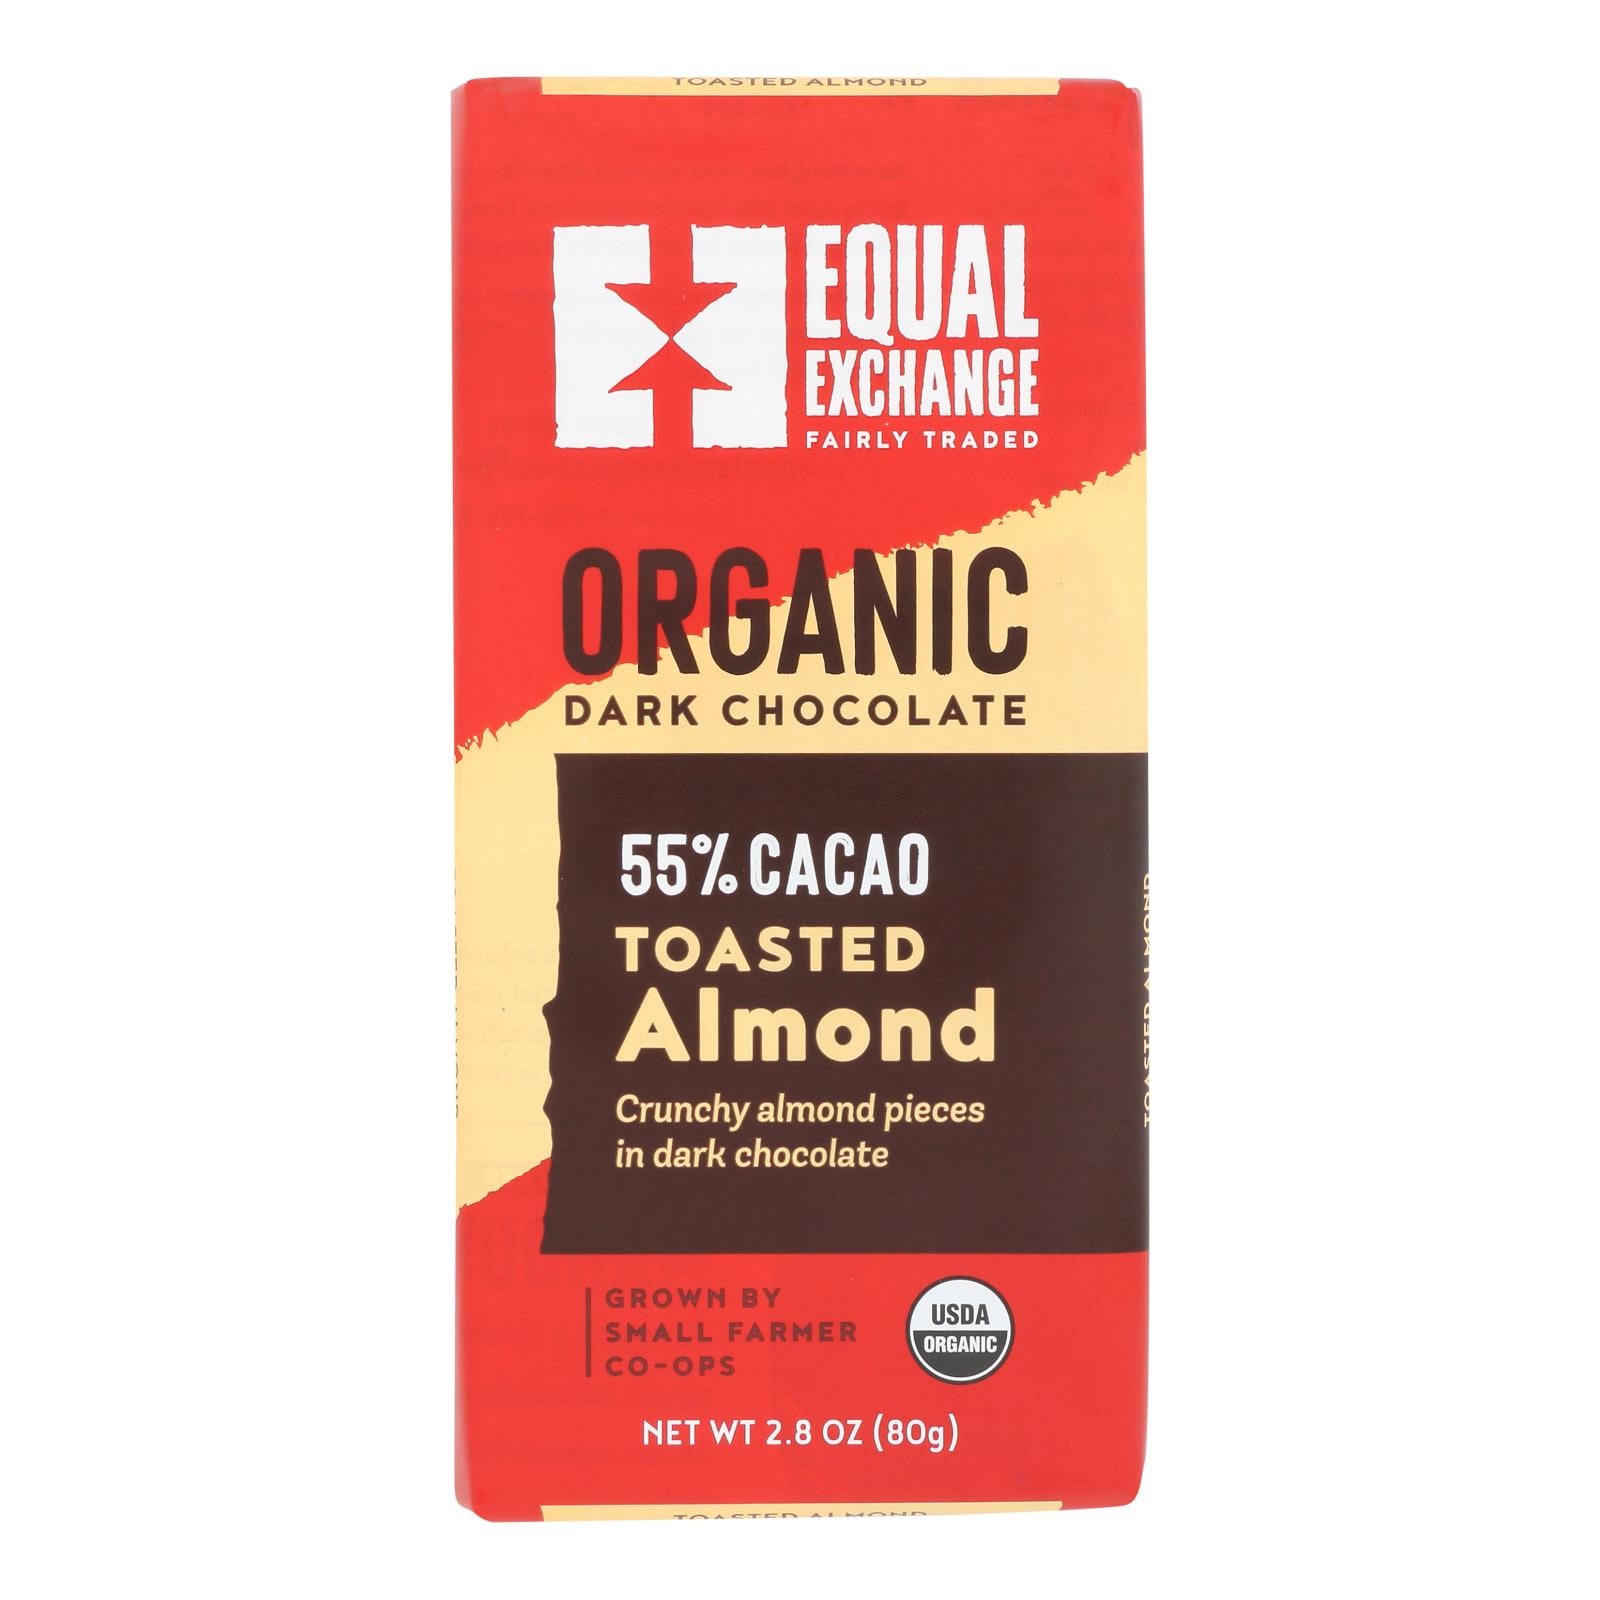 Organic Dark Chocolate Bar with Almonds - 2.8 Oz. by Equal Exchange - Case of 12